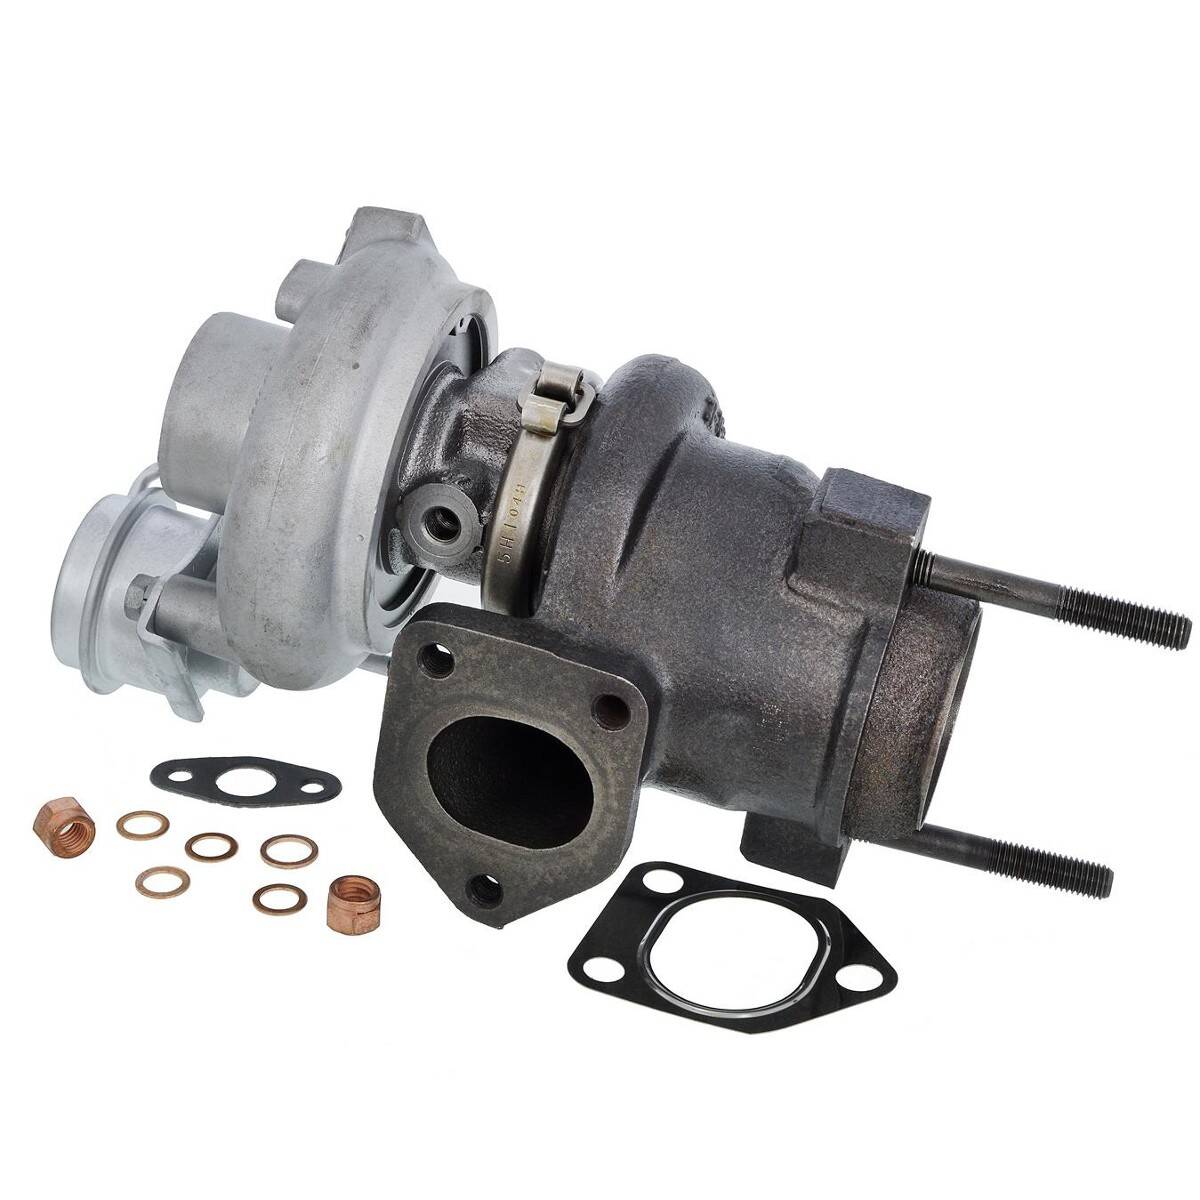 TURBOCHARGER TURBO REMANUFACTURED 49177-06422 49177-06422 49